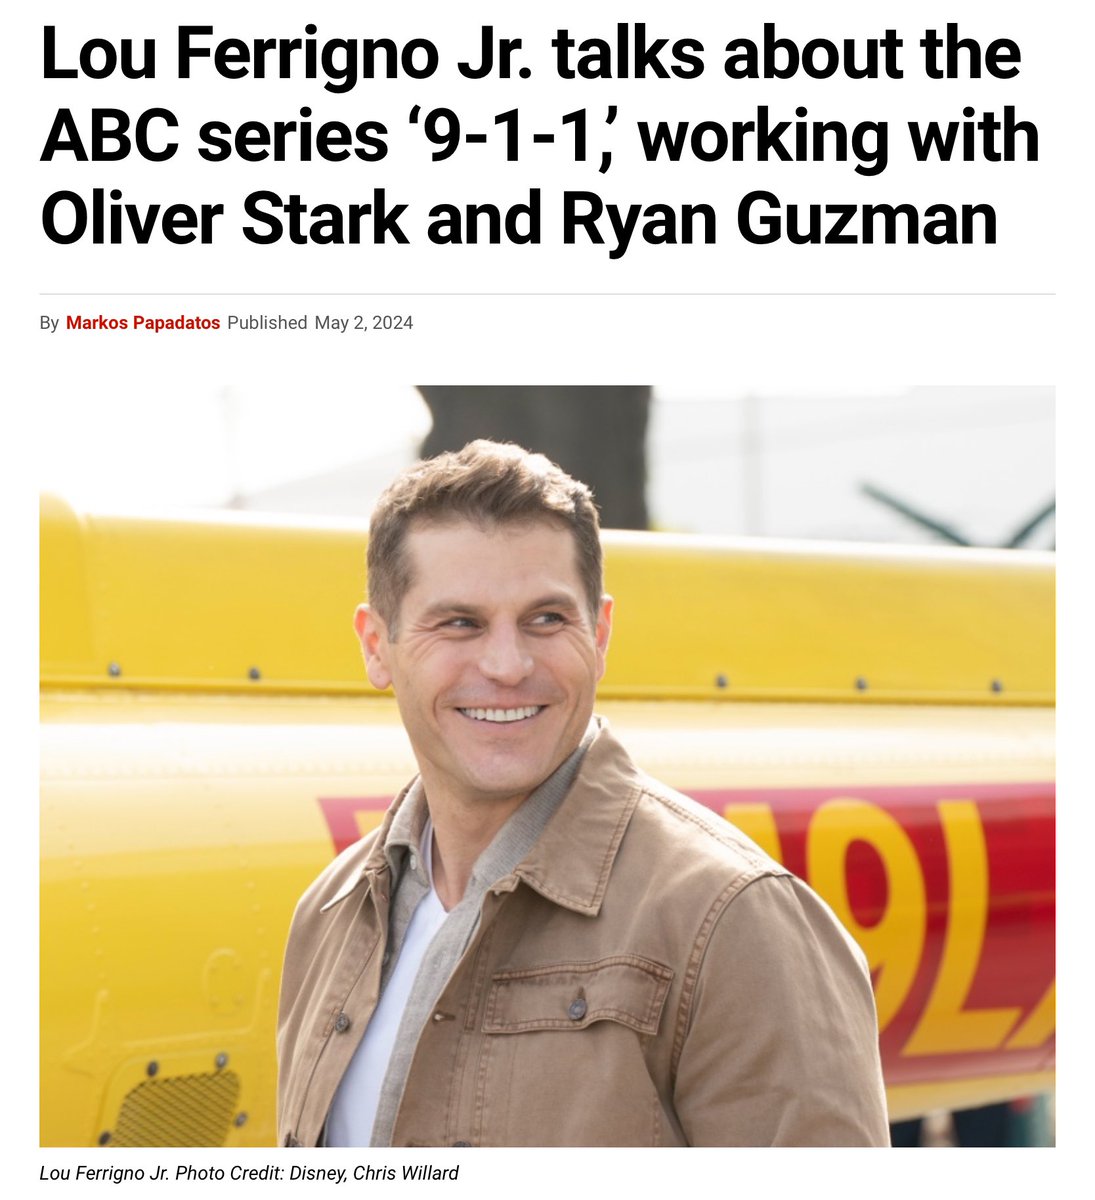 @LouFerrignoJr spoke with @powerjournalist about returning to #911onABC & working with #OliverStark, @ryanAguzman & the rest of the cast. Read the @digitaljournal interview now: digitaljournal.com/entertainment/…